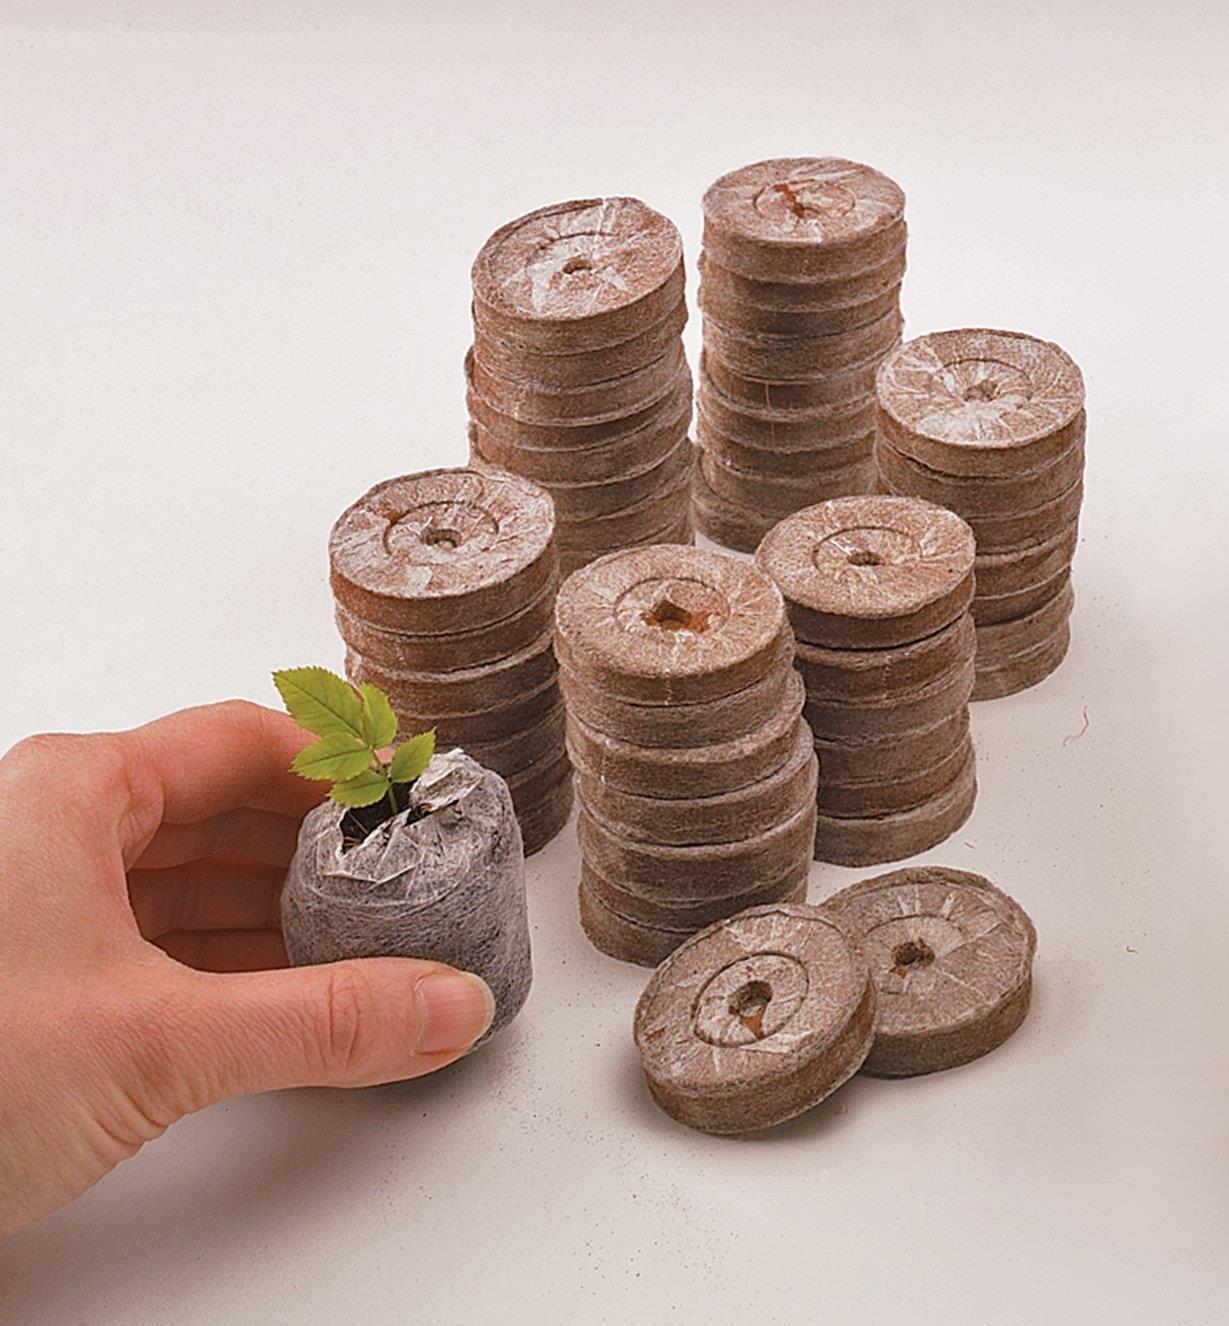 Several stacks of coir pellets, with one pellet expanded and holding a seedling